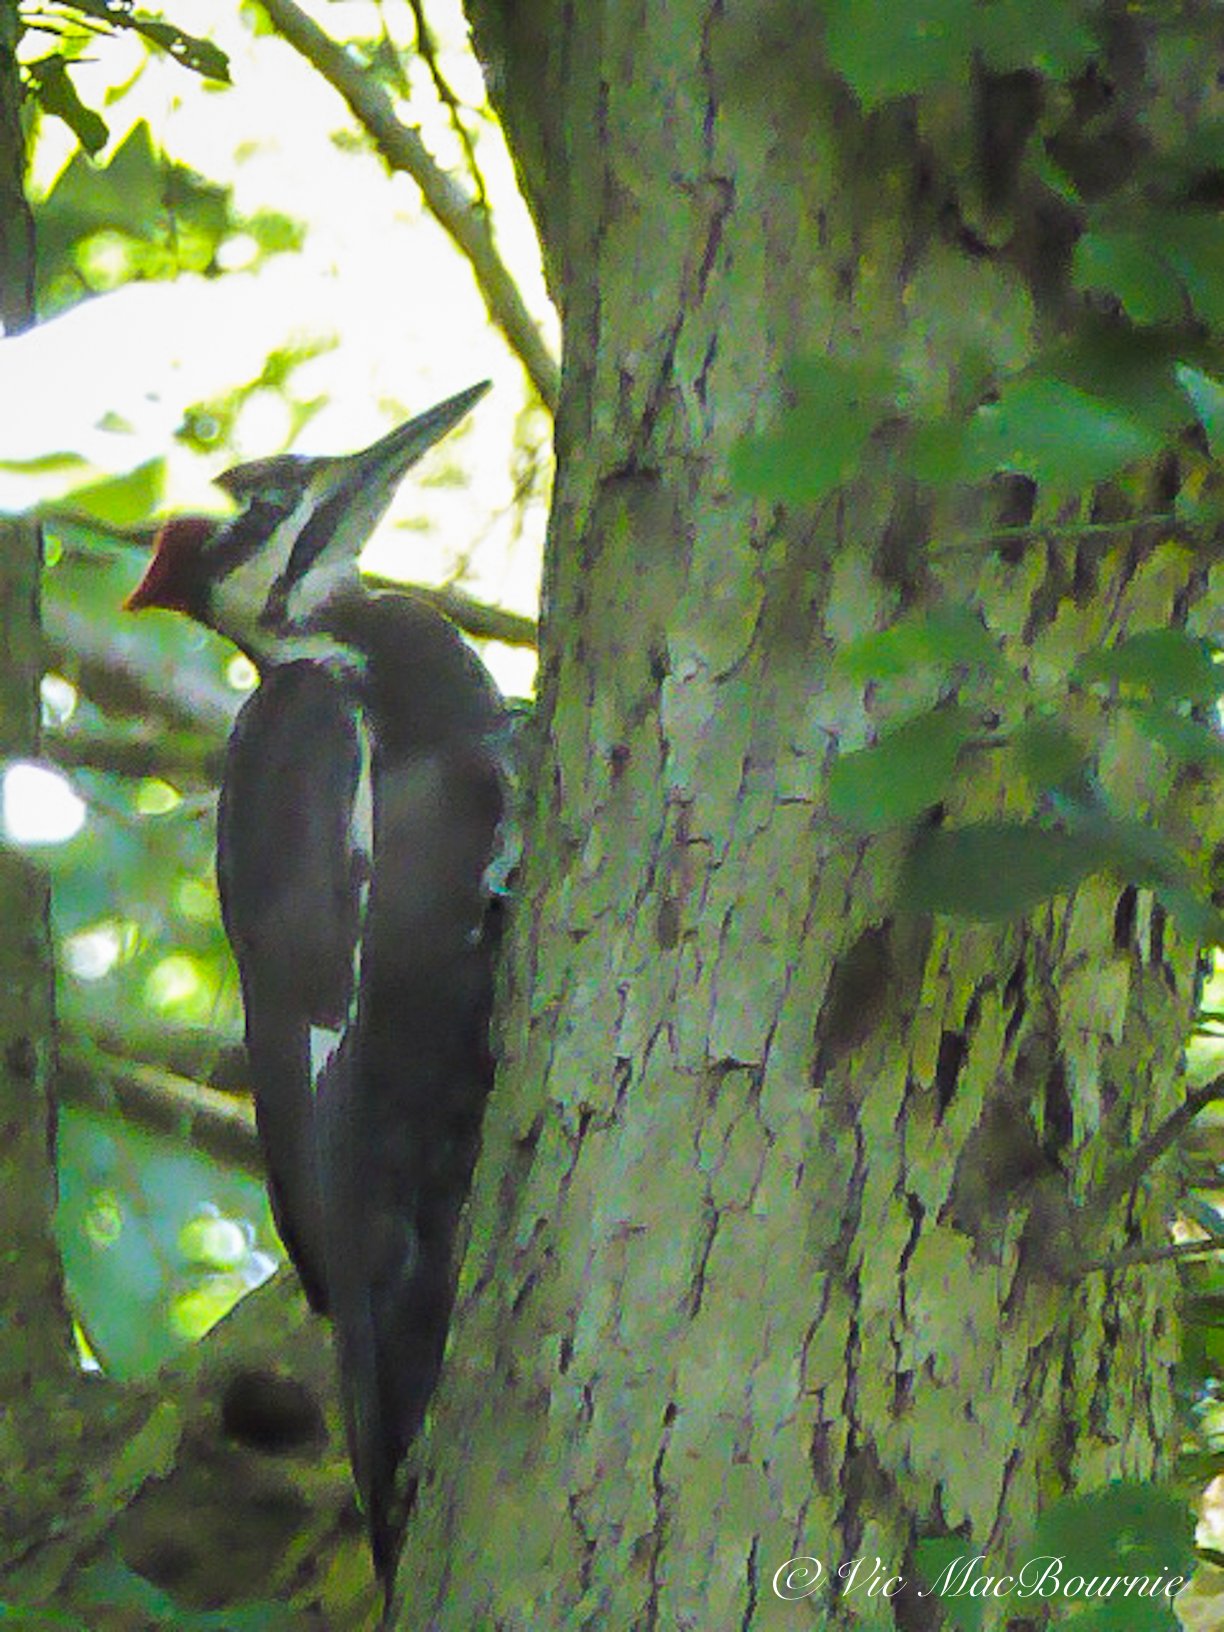 Pileated woodpecker working an old dying tree